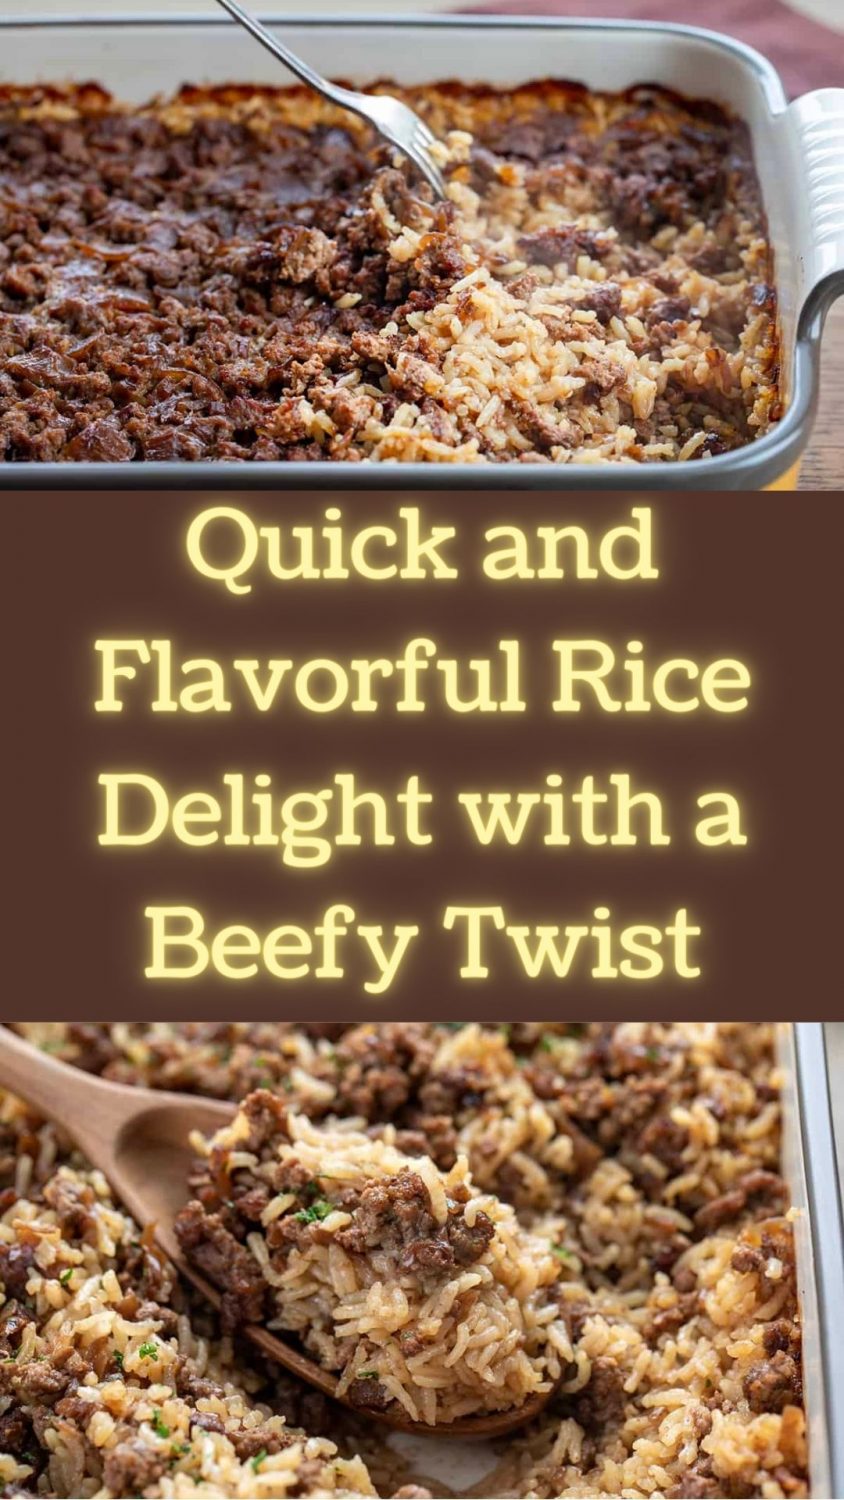 Quick and Flavorful Rice Delight with a Beefy Twist